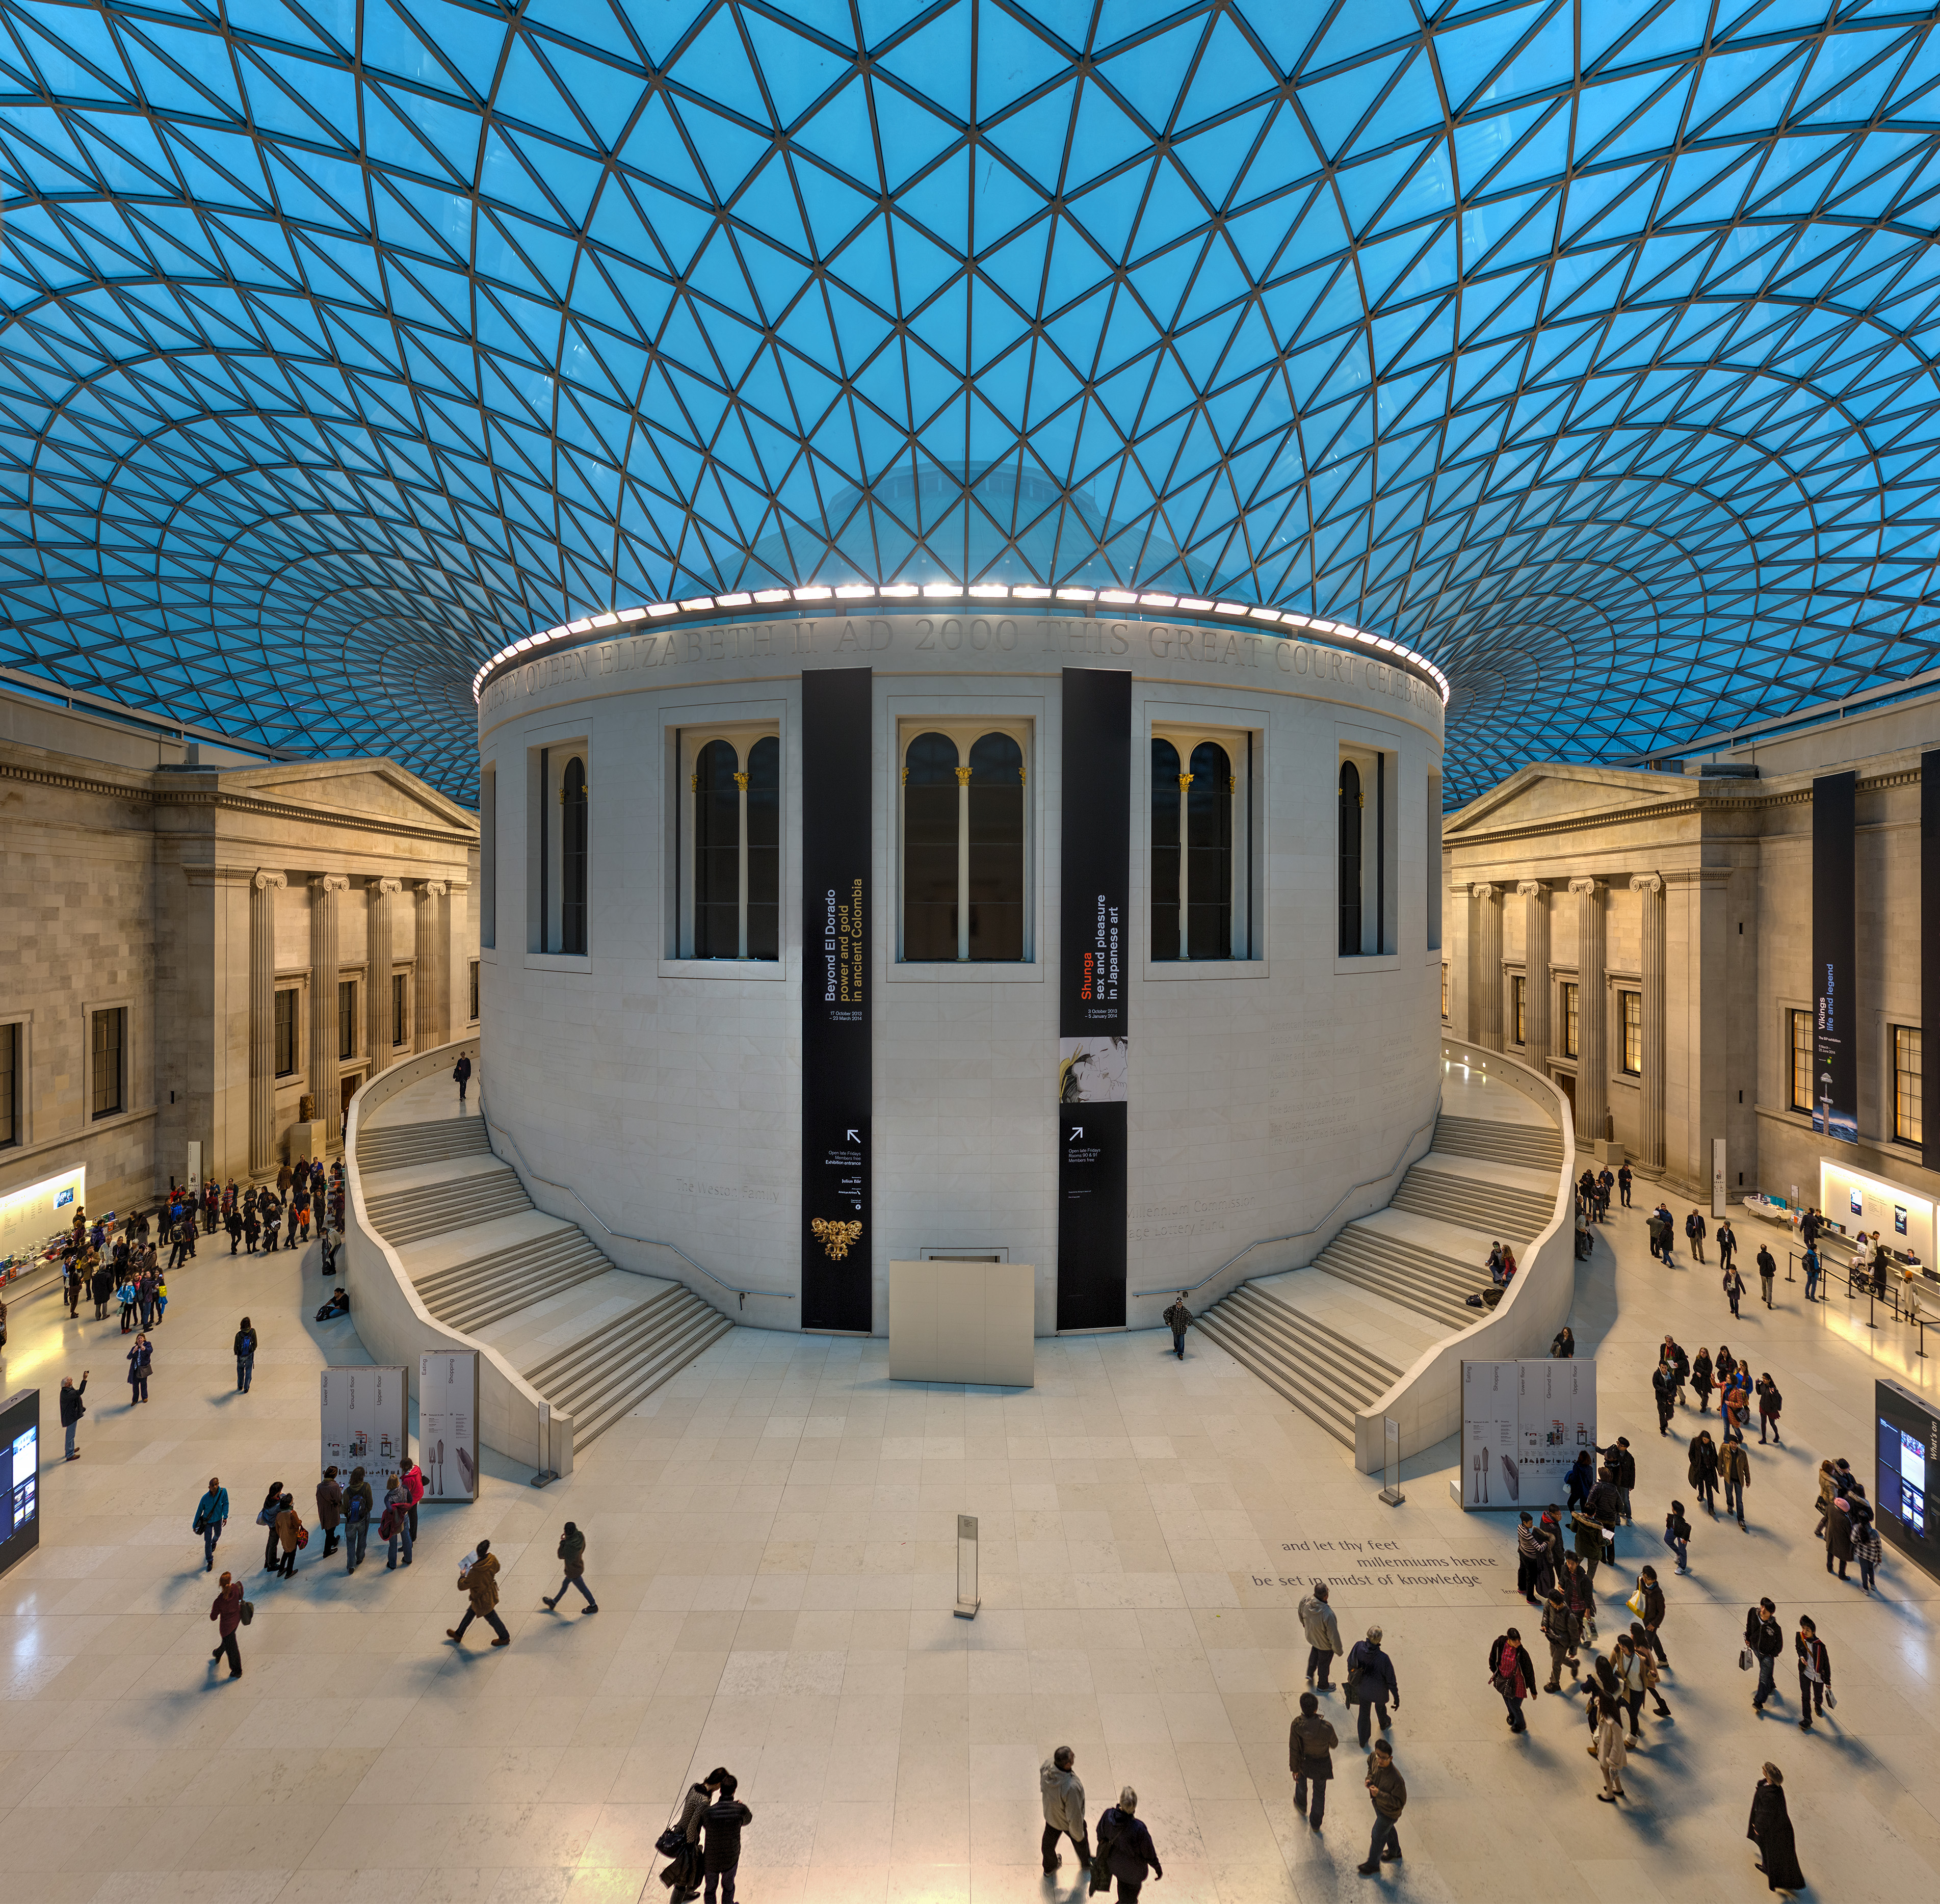 Panoramic shot of the British Museum’s Great Court, taken in November 2013. The British Museum has famously refused to return the Elgin Marbles to Greece, and activists seeking the return of African objects and artifacts in the institution’s collection have also met resistance, some of it rooted in UK law. Image courtesy of Wikimedia Commons, photo credit David Iliff. Shared under the Creative Commons Attribution-Share Alike 3.0 Unported license.